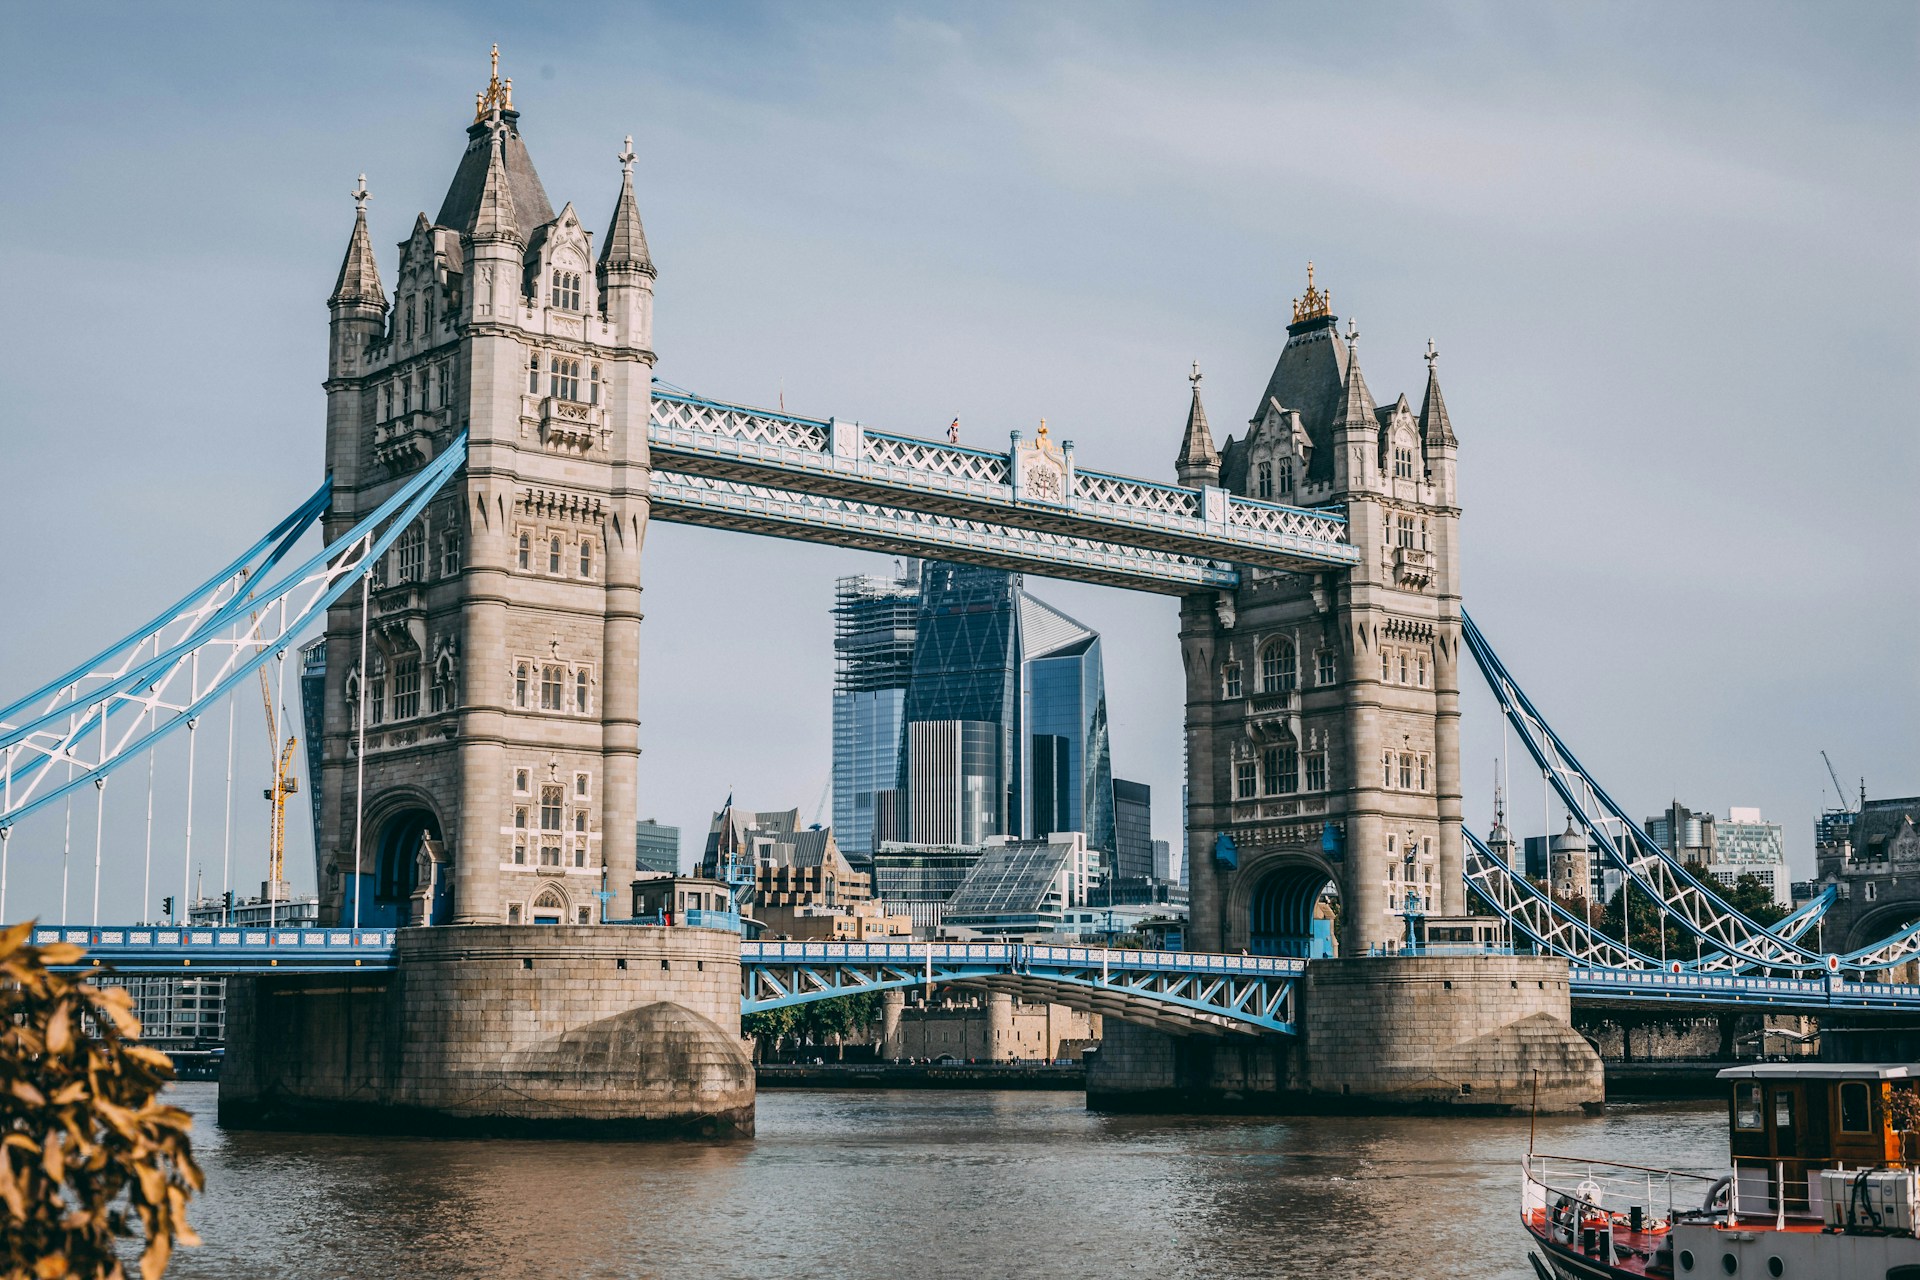 <p>London is a city full of rich history and cultural diversity. People come to London for famous sights such as the Tower of London, Buckingham Palace, and the British Museum. It also popular for its architecture, shops, and cuisine.</p>